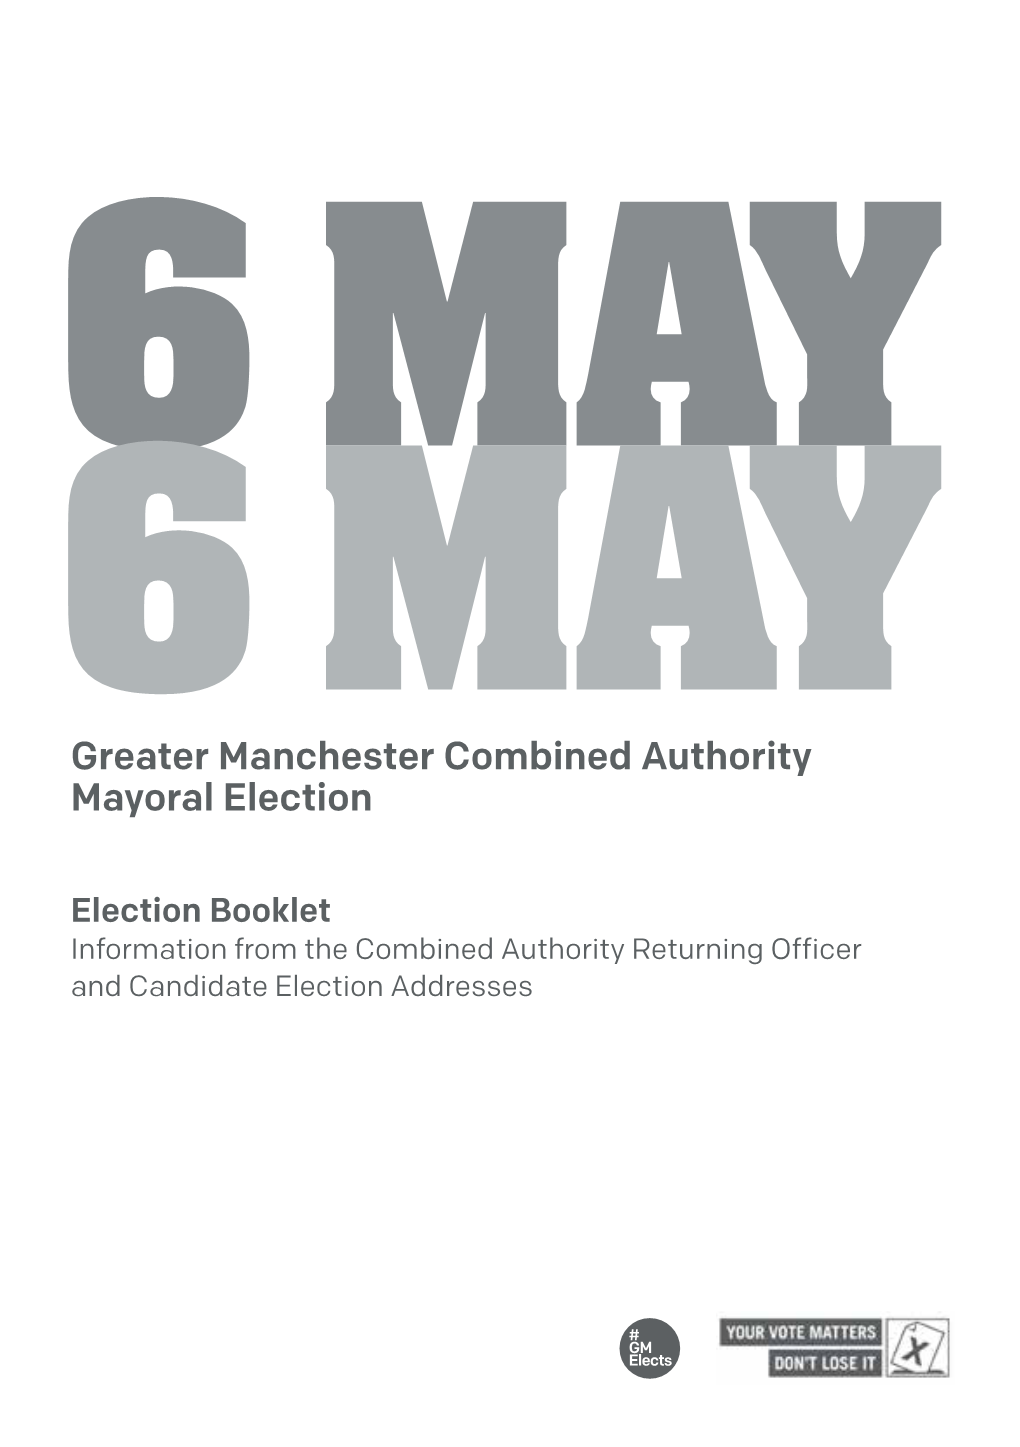 Greater Manchester Combined Authority Mayoral Election